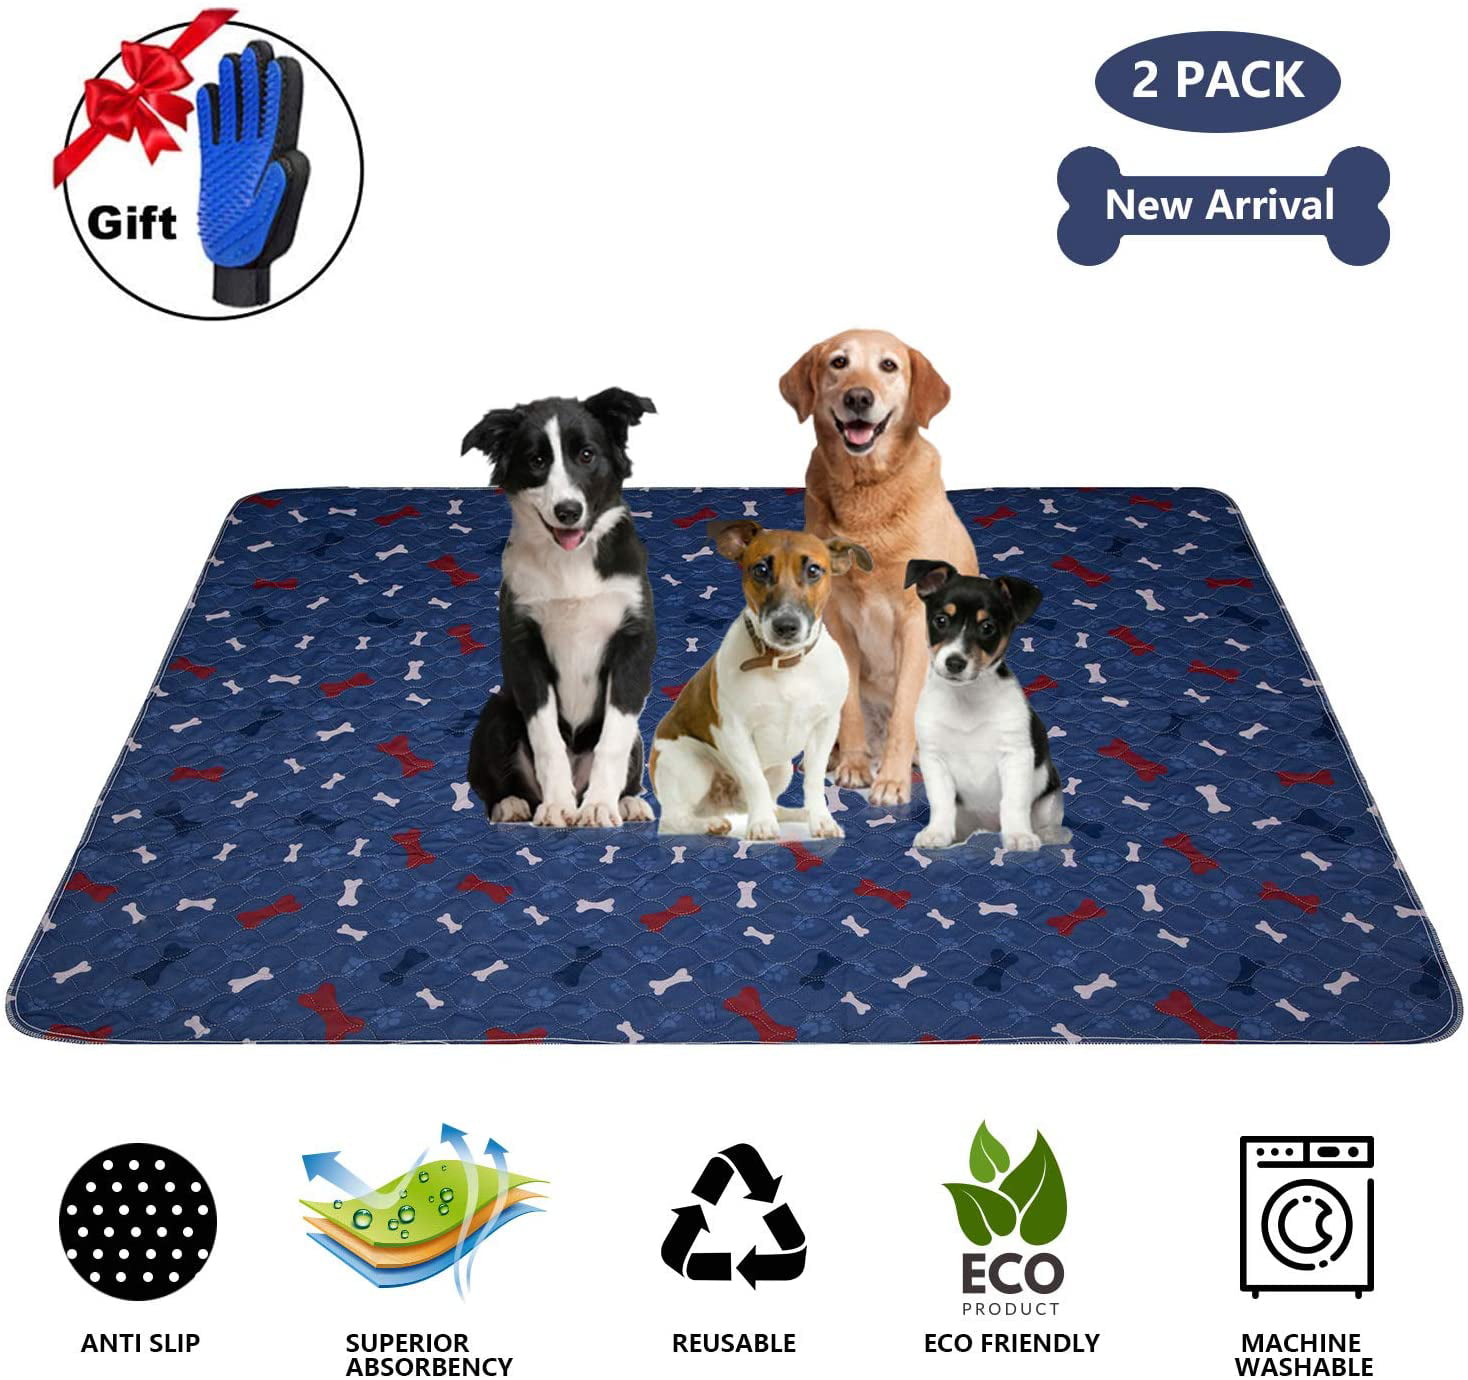 Waterproof mat 3-Pack Washable Pee Pads for Dogs 30 x 36 Dog Crate Pads Potty Pads JUNGLE CREATIONS | Training Pads for Dogs Puppies 